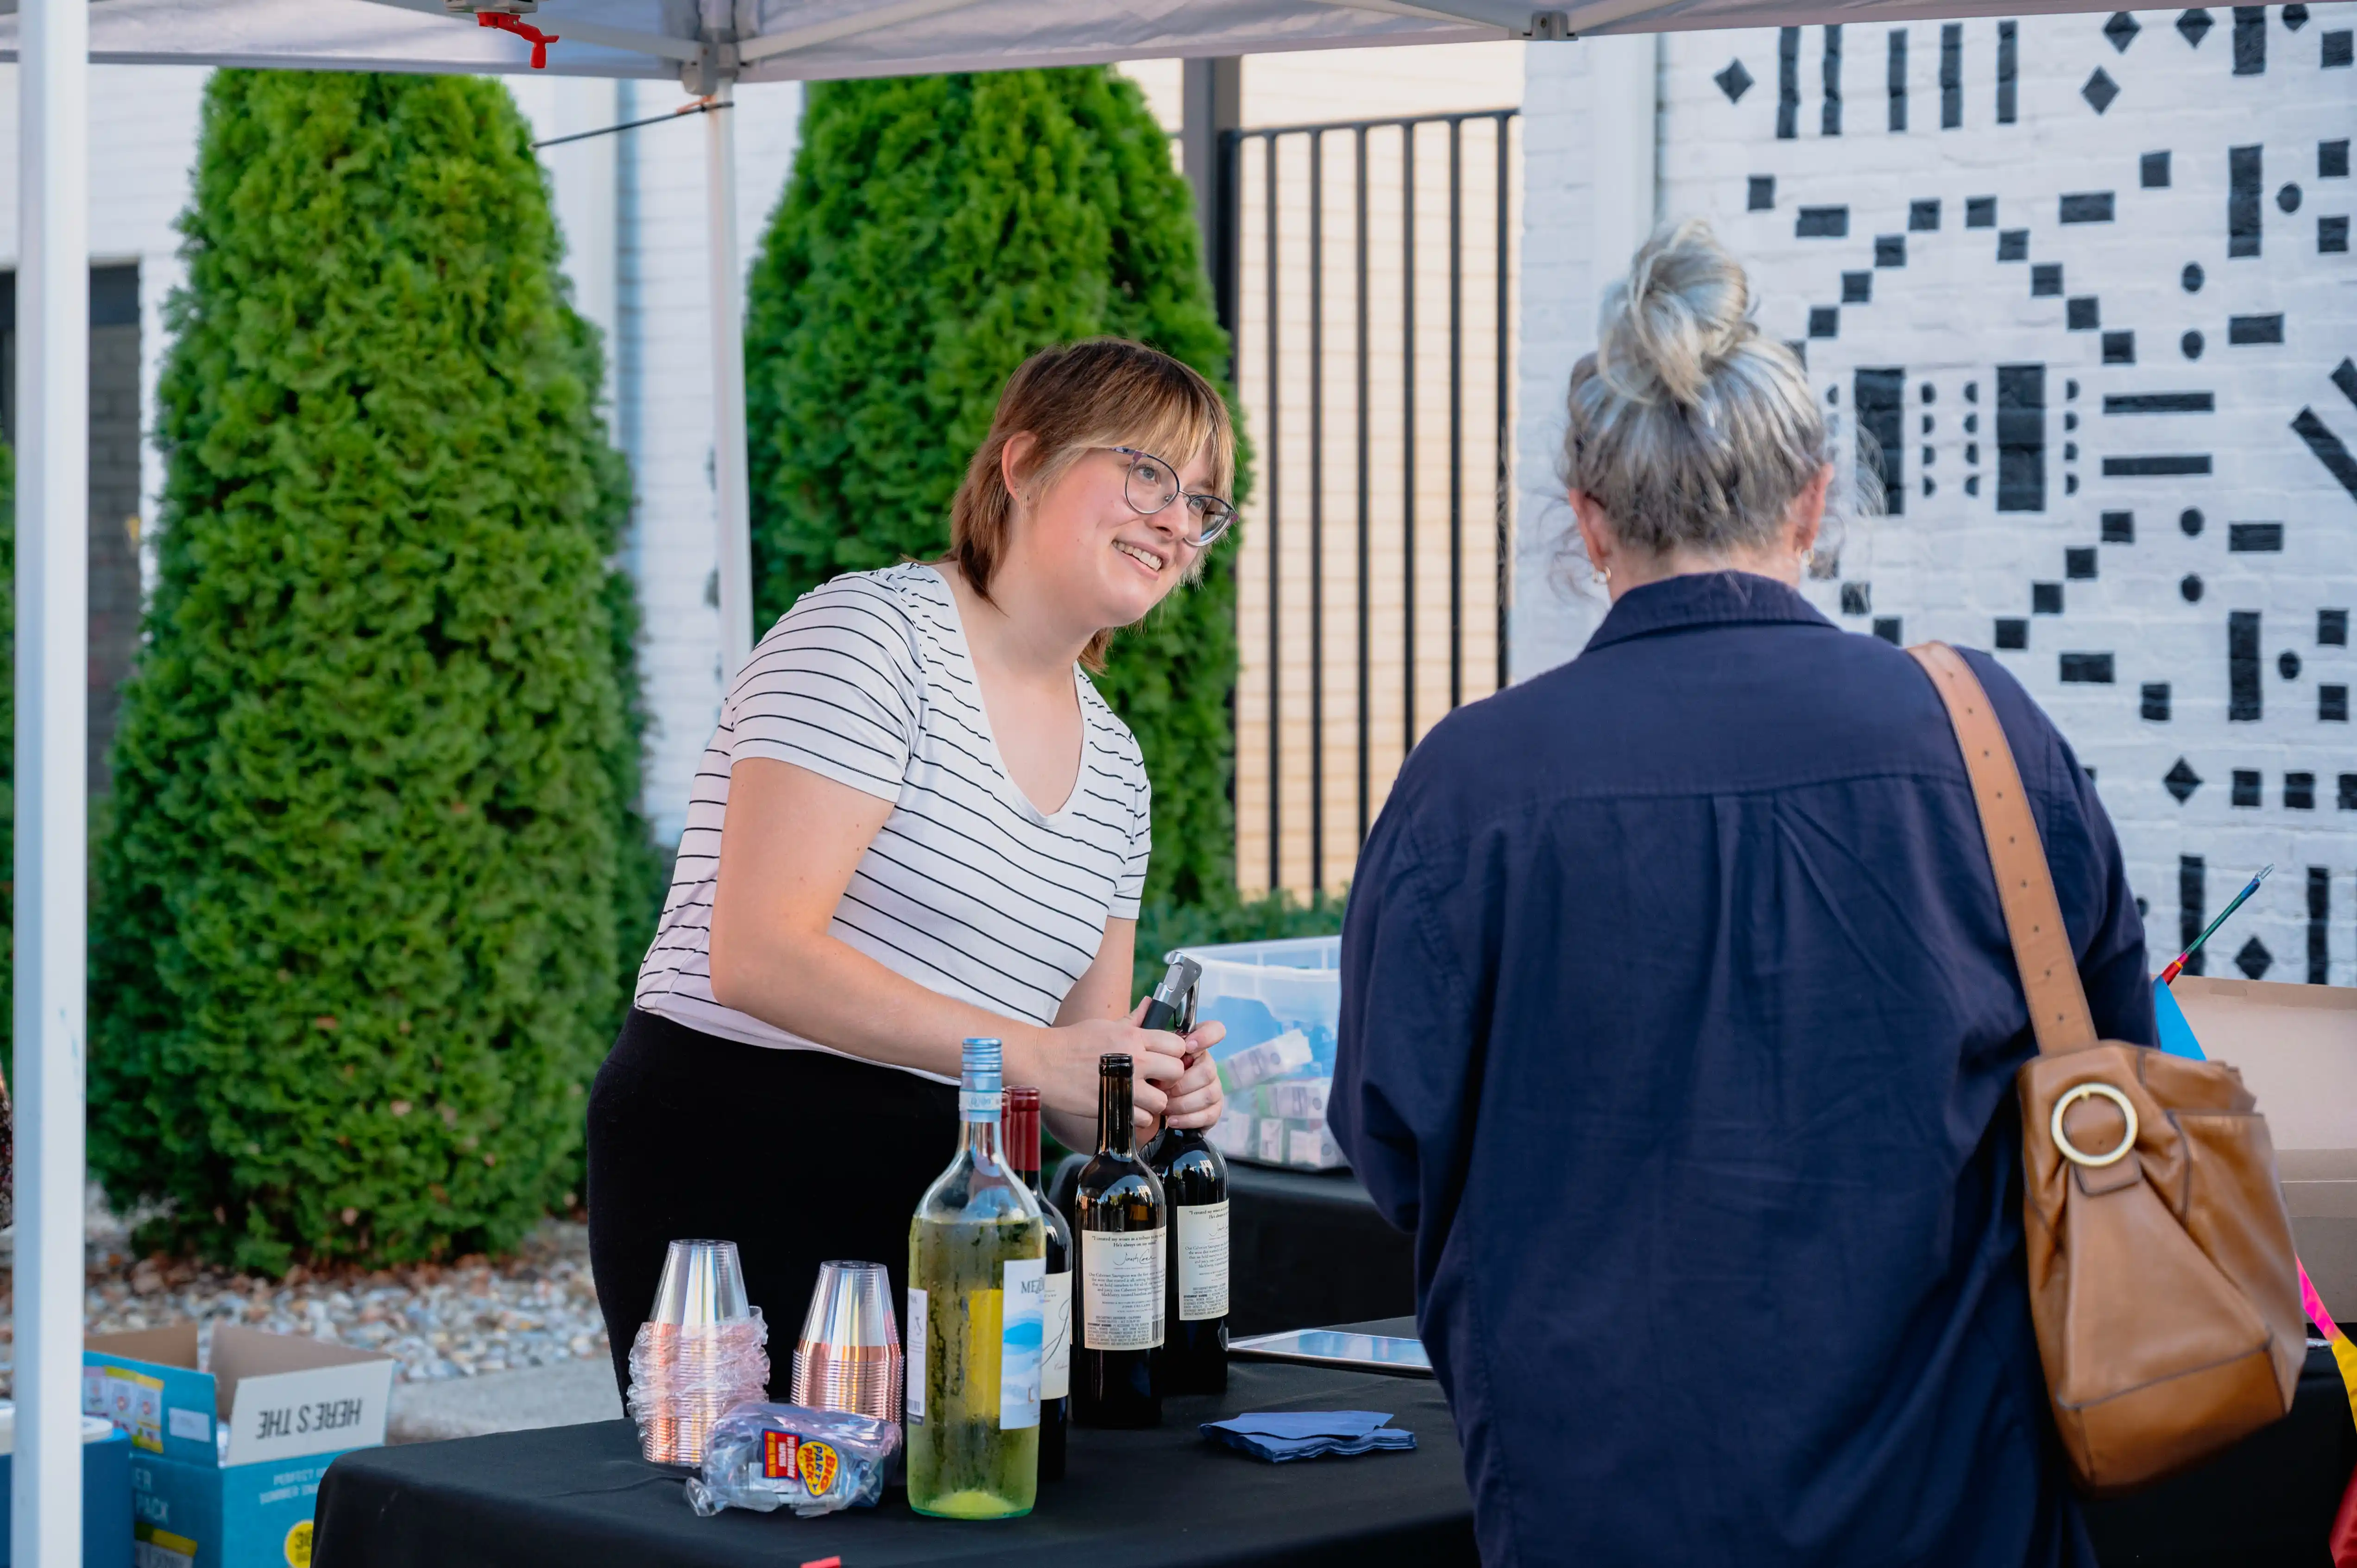 A woman smiling while serving wine at an outdoor tasting booth with another person standing in front.